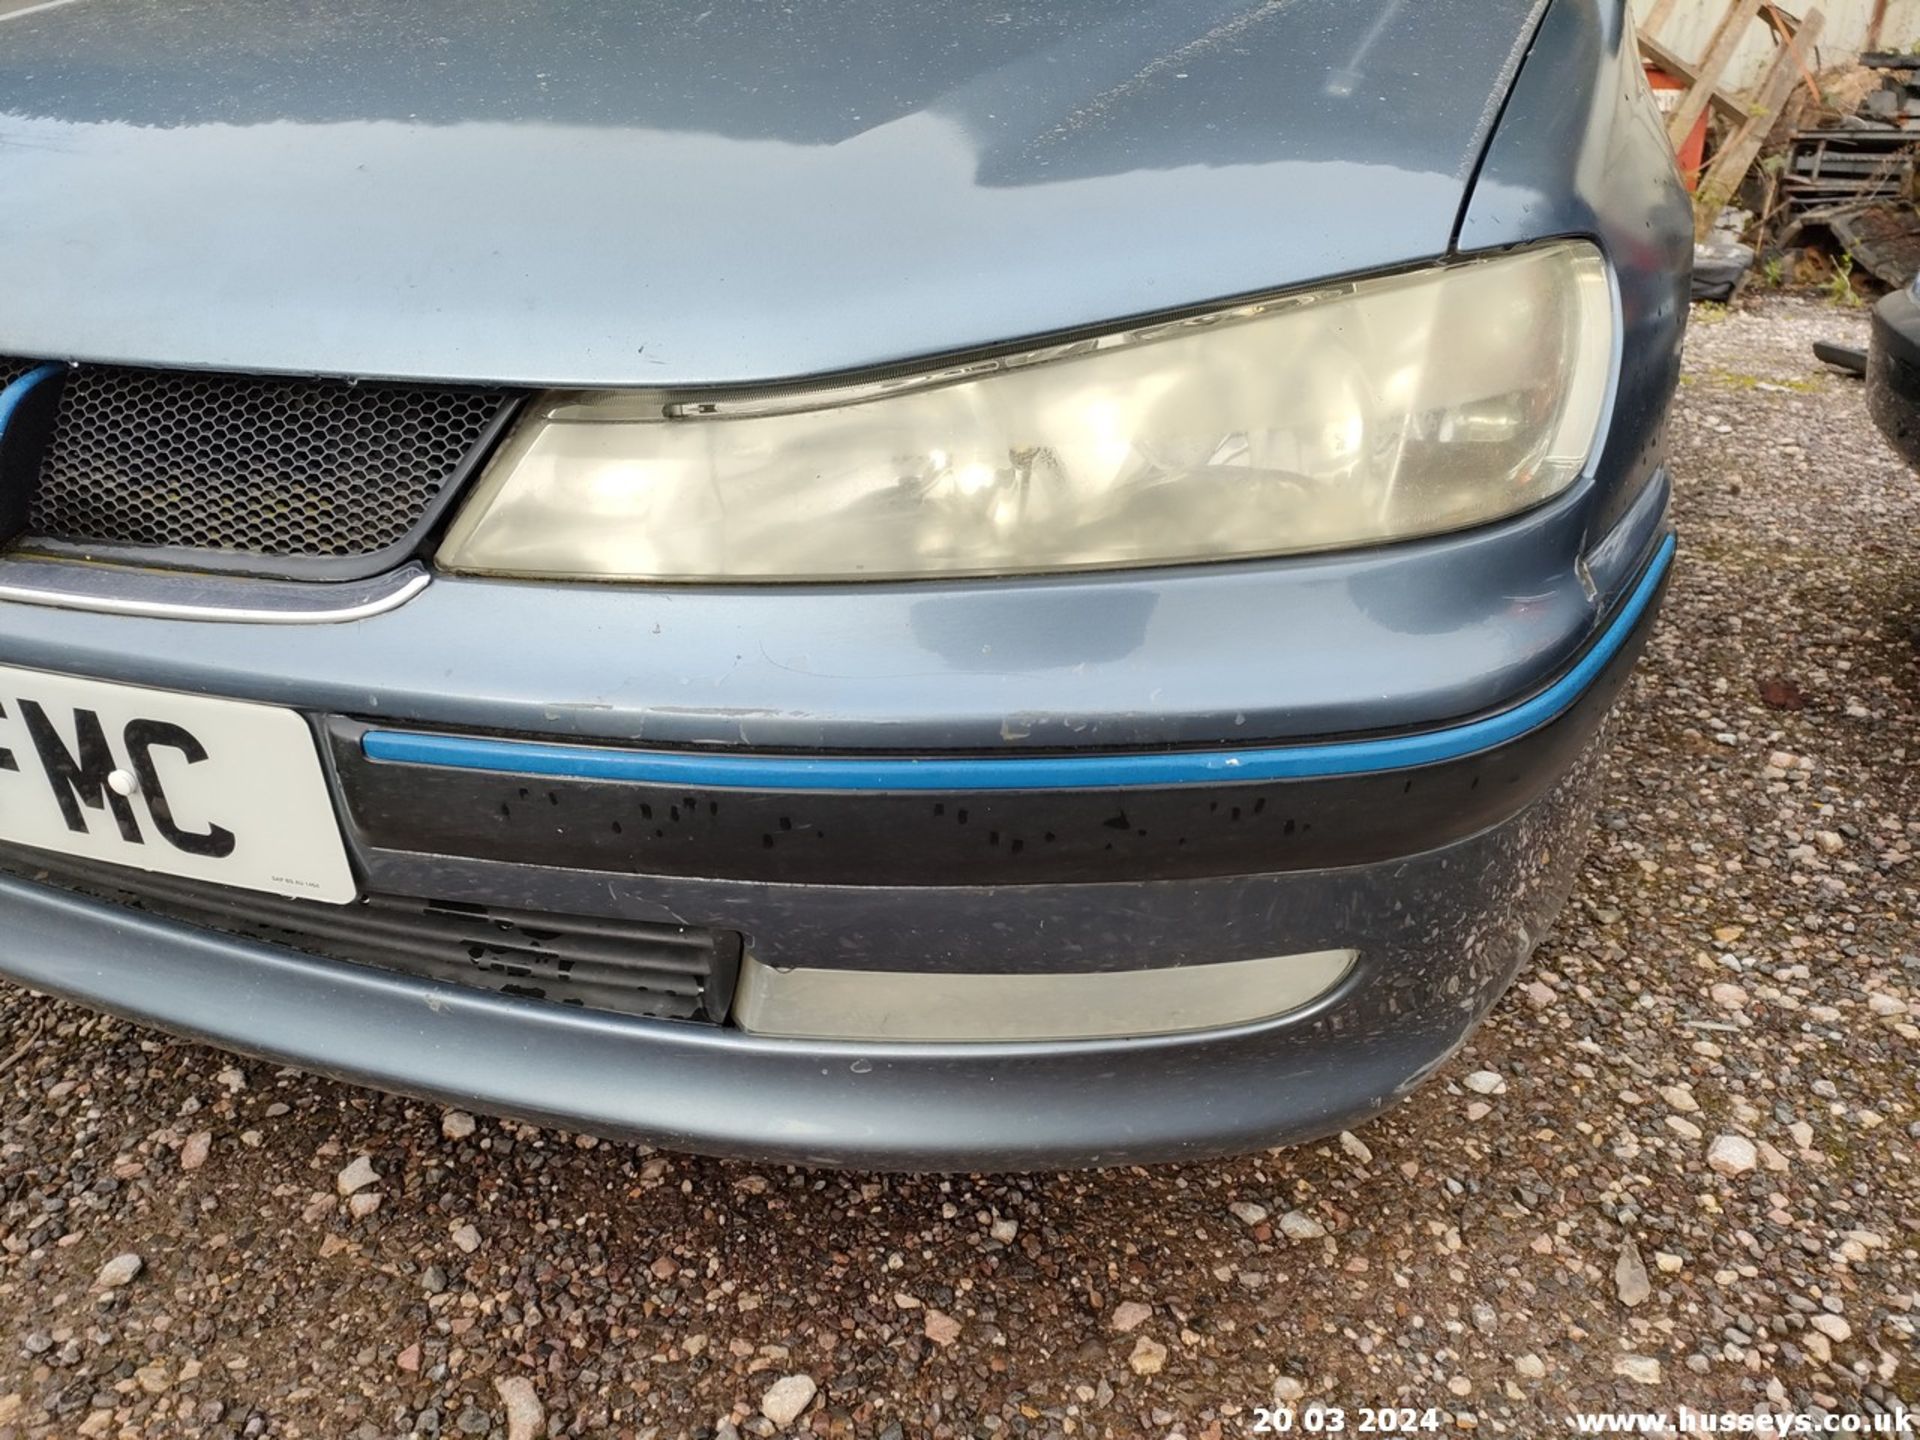 02/51 PEUGEOT 406 GTX HDI AUTO - 1997cc 4dr Saloon (Blue) - Image 14 of 59